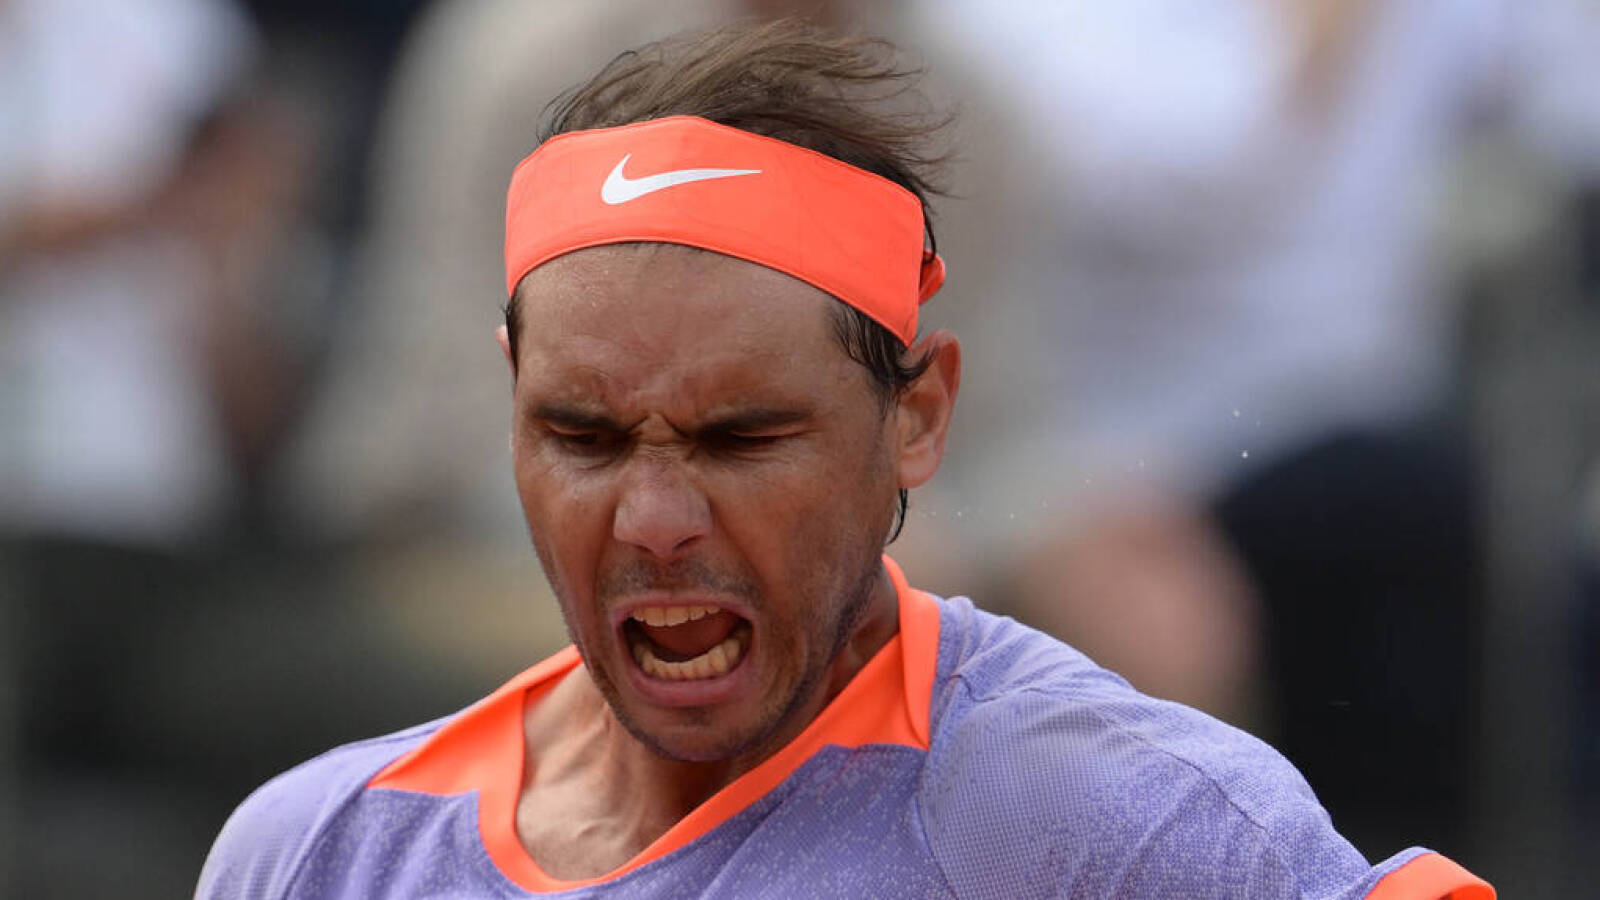 'It’s living the dream,' Zizou Bergs explains how special it was to play Rafael Nadal as he loses to him in the first round of Italian Open